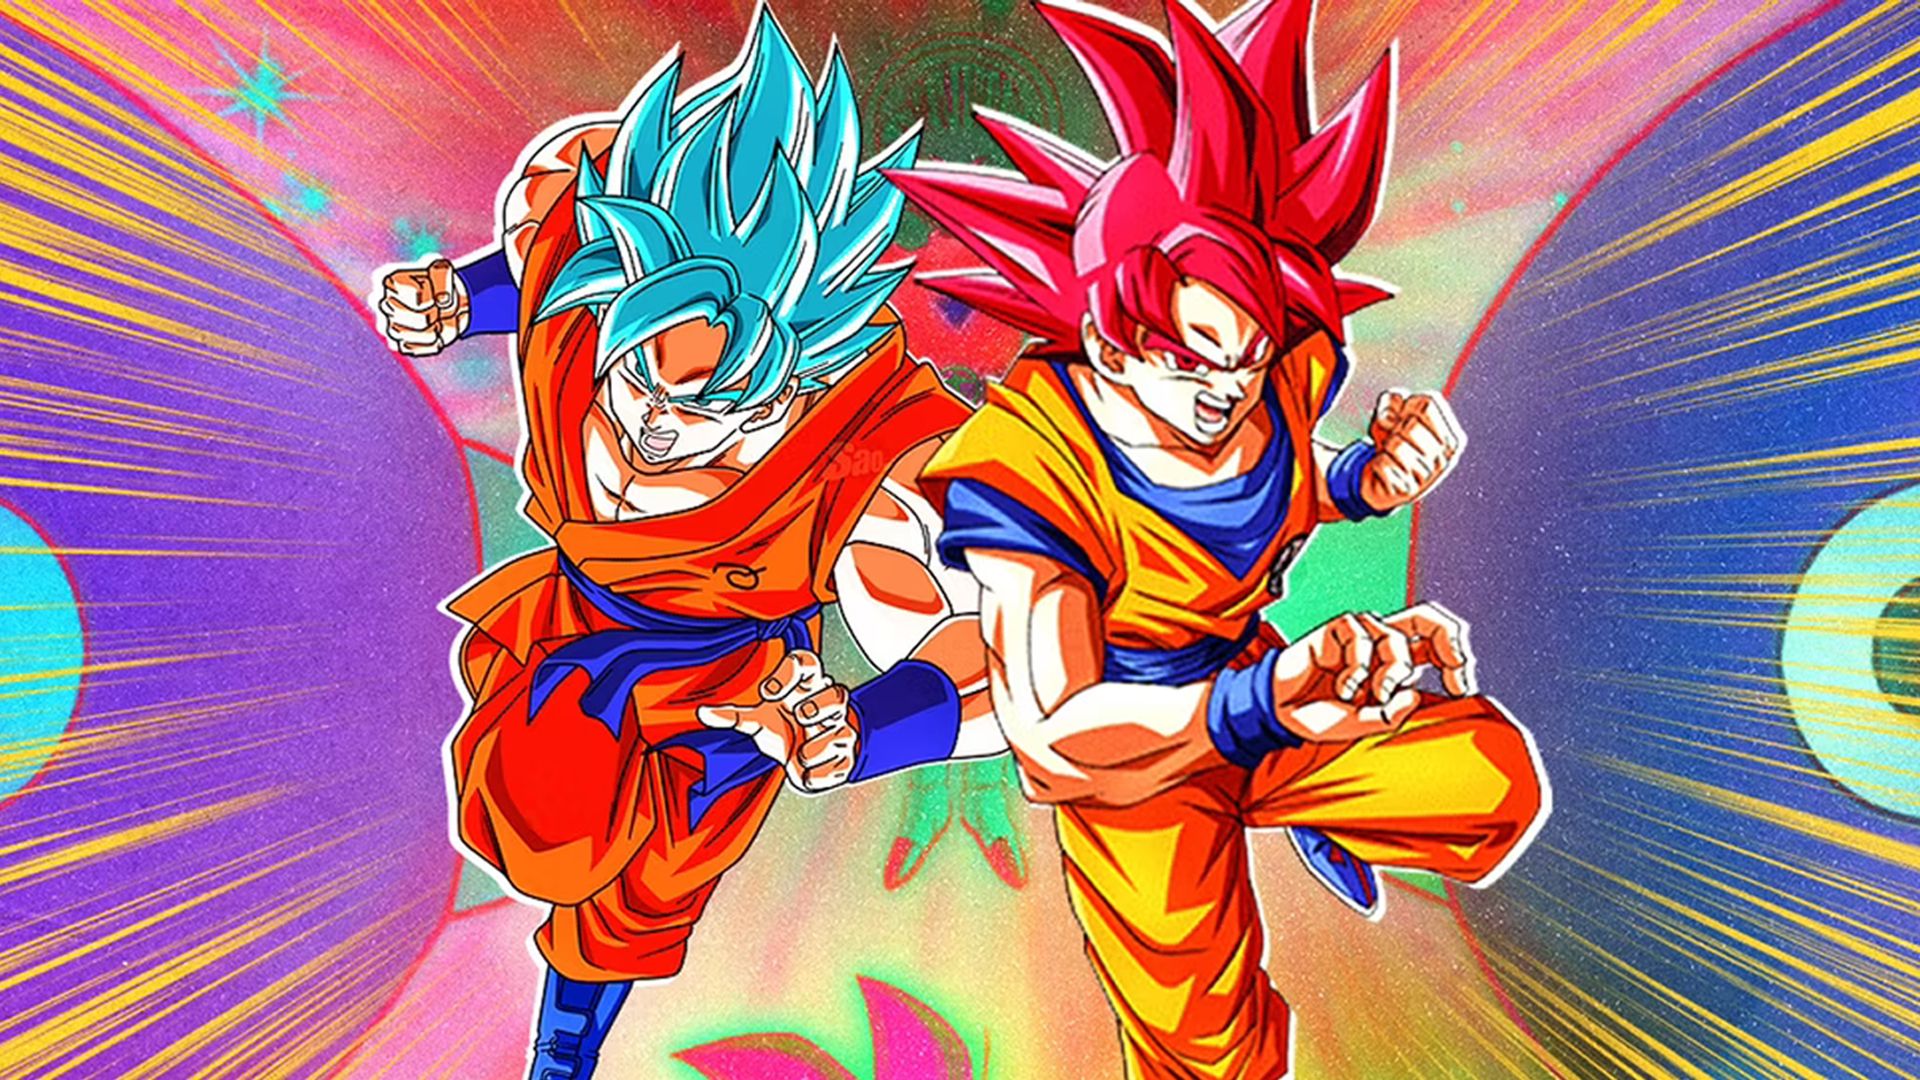 What's The Difference Between Super Saiyan God and Super Saiyan Blue?